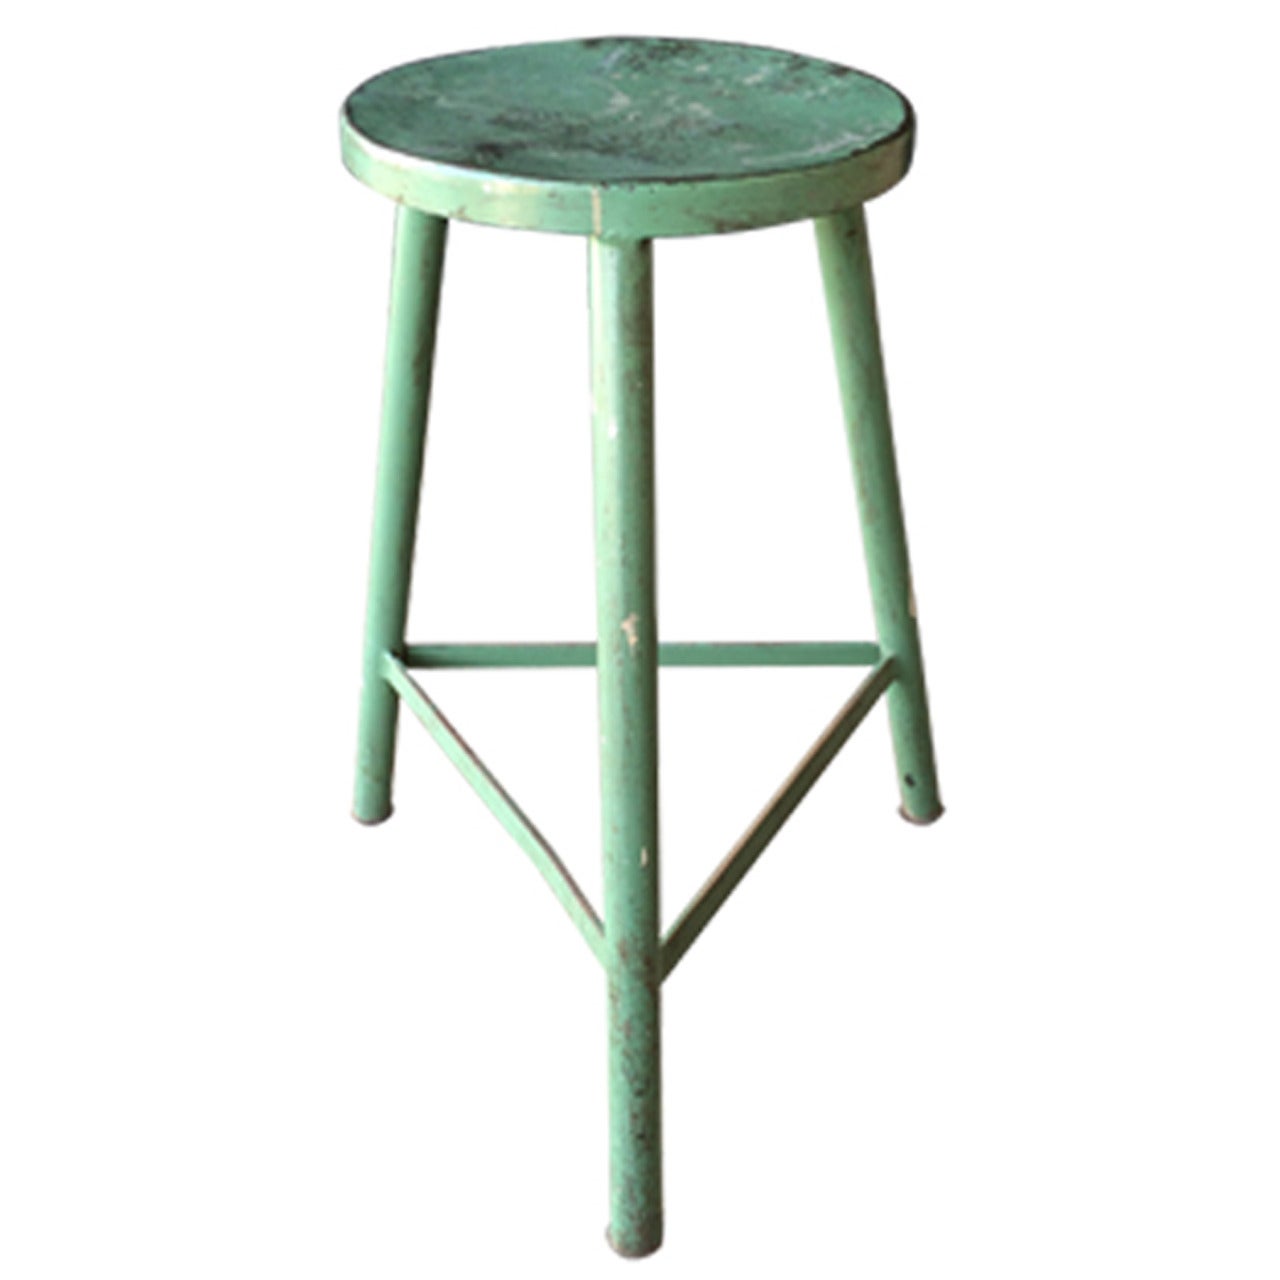 Vintage Industrial Metal Stools with Original Paint For Sale